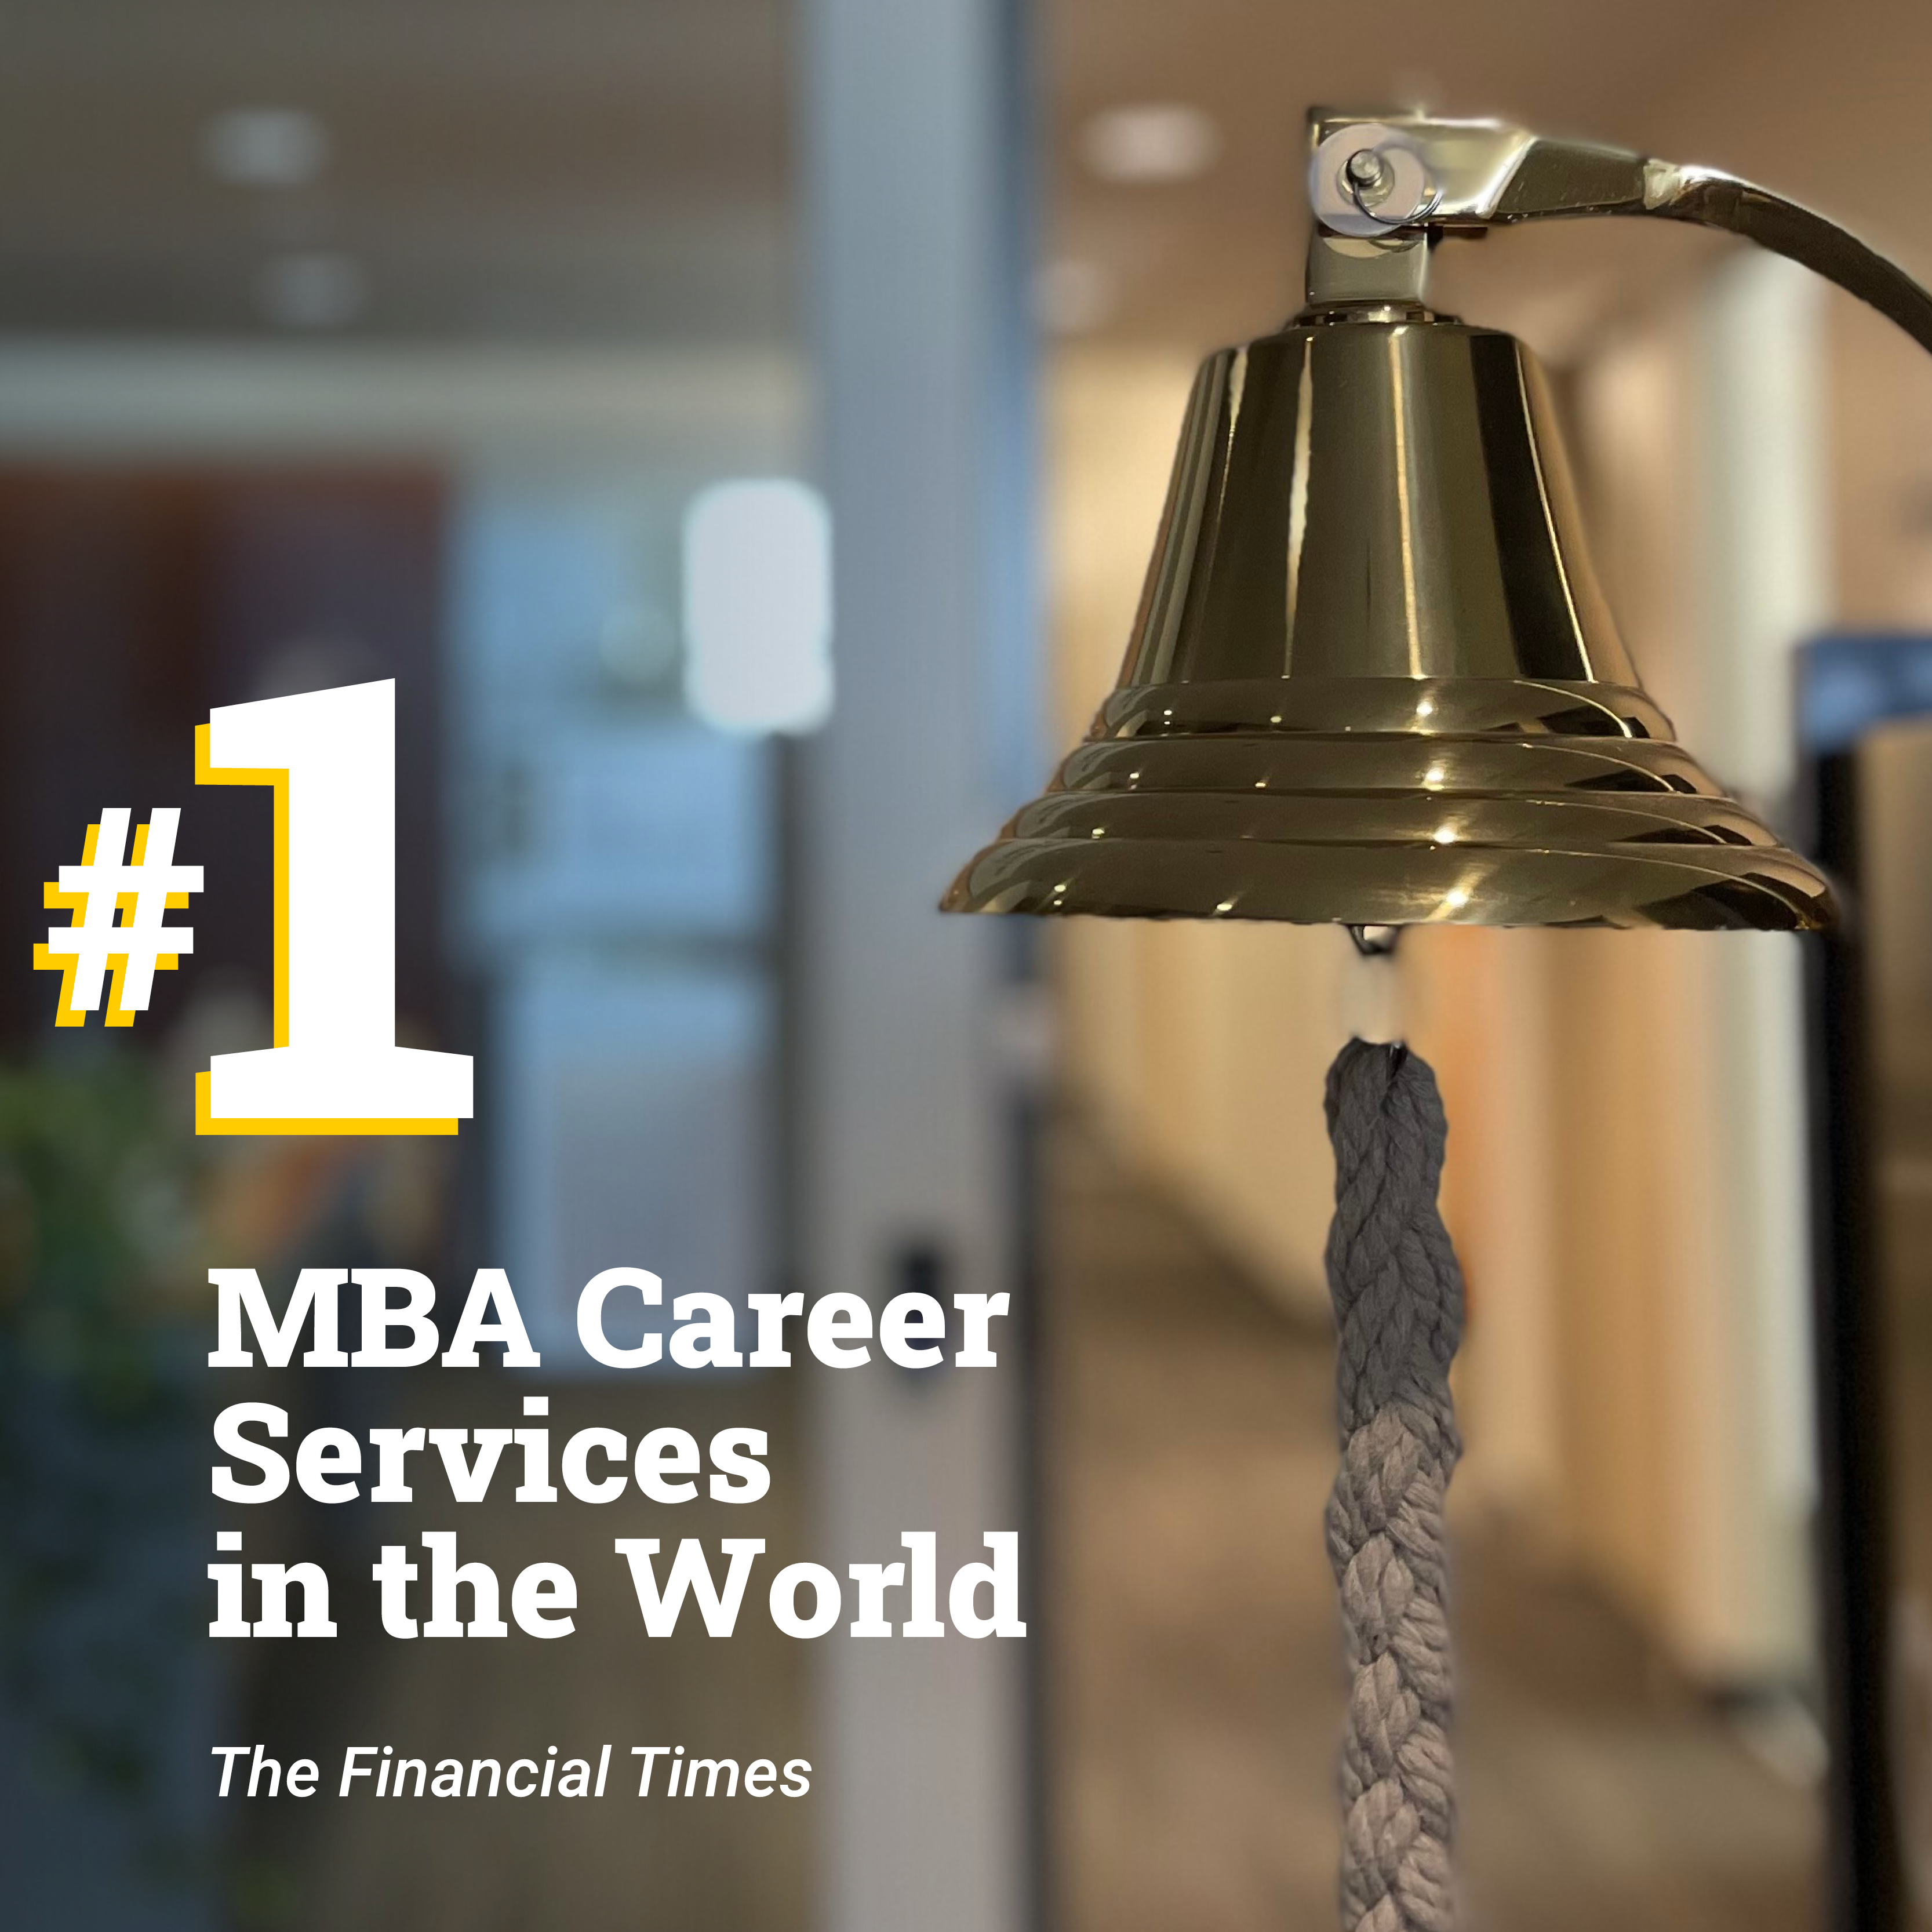 #1 MBA Career Services in the World, The Financial Times